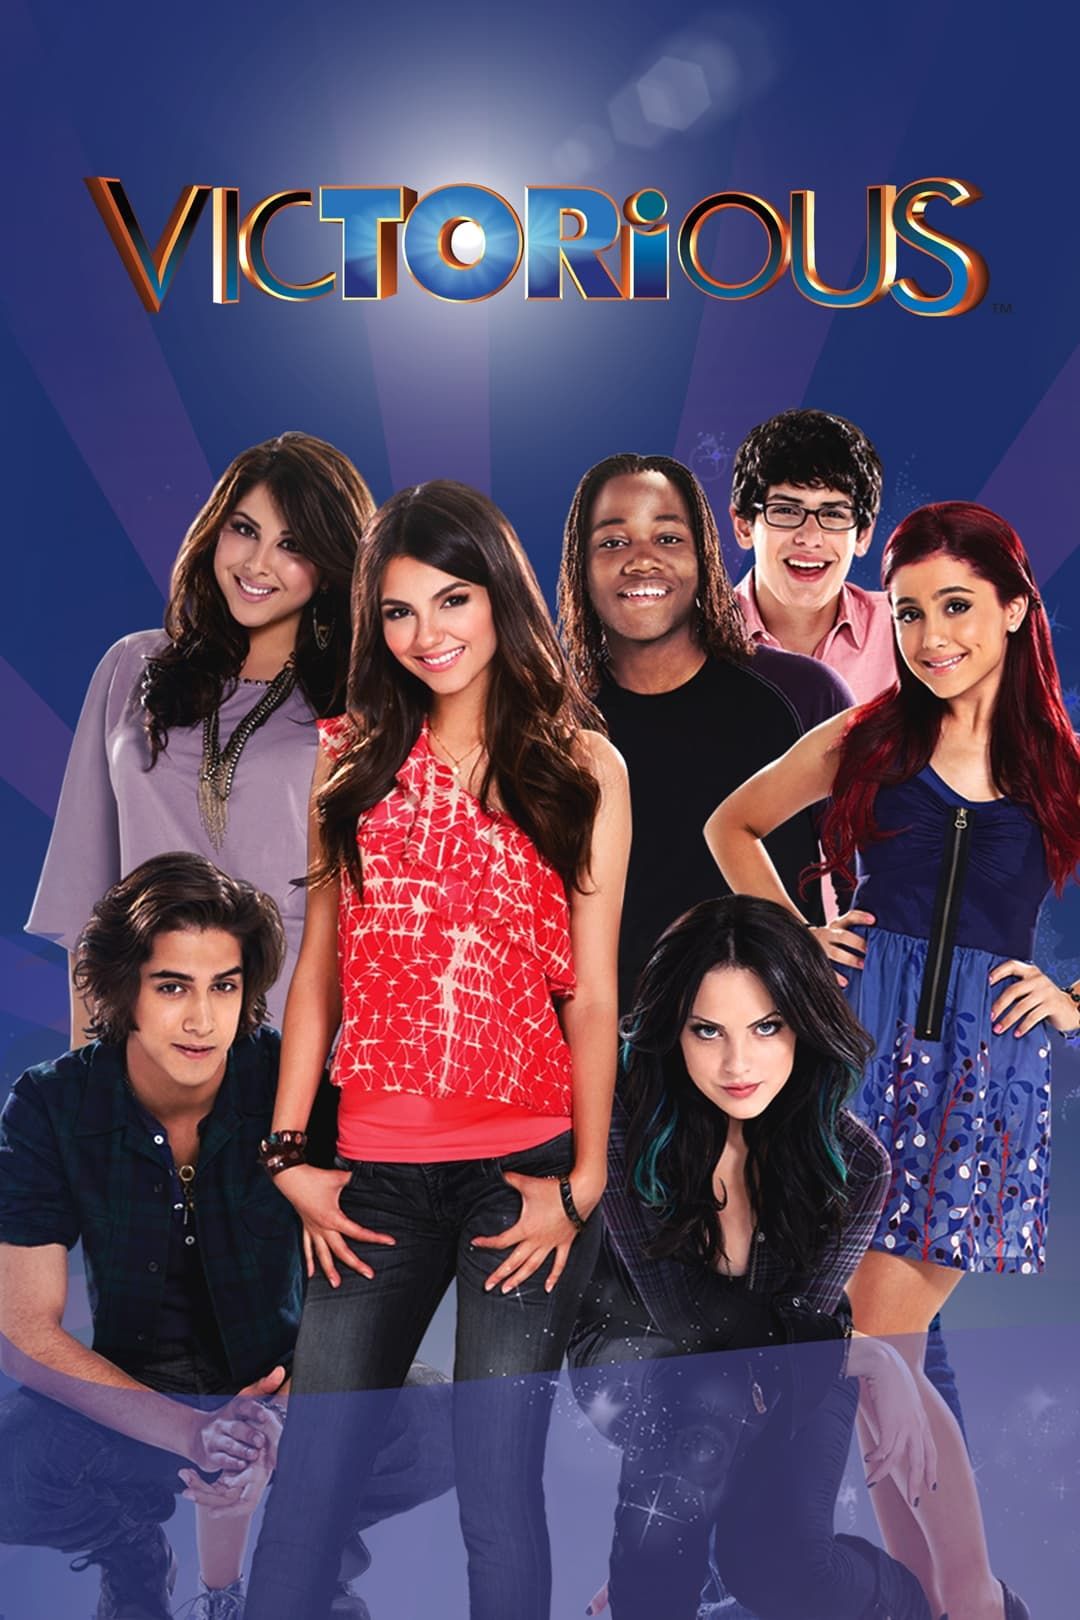 Victorious Season 1: Where To Watch Every Episode